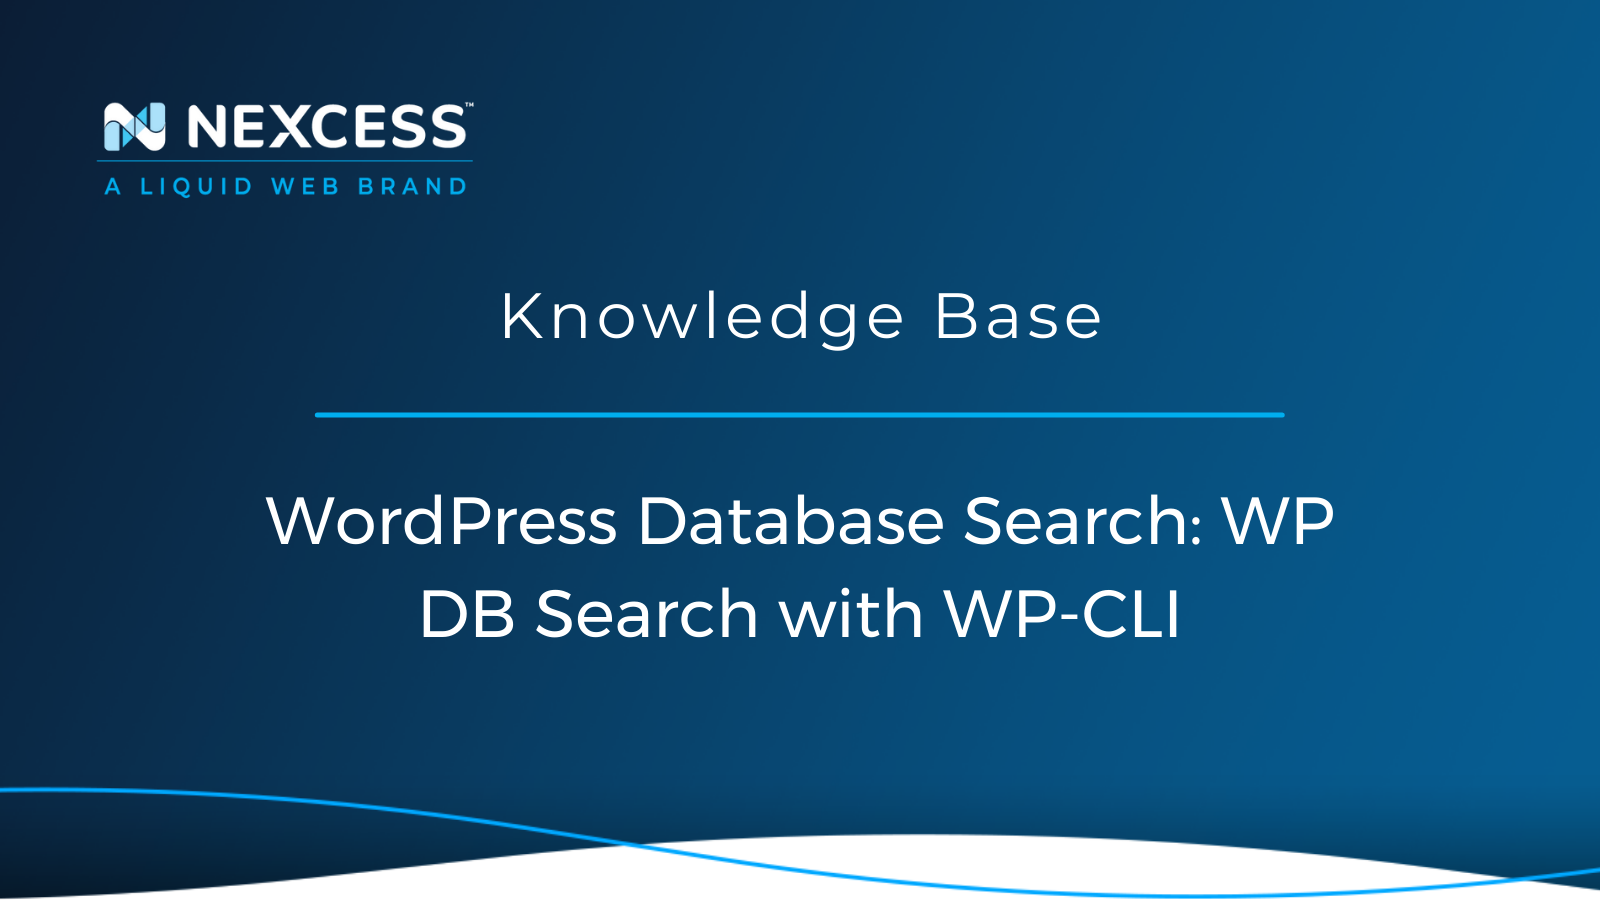 WordPress Database Search: WP DB Search with WP-CLI